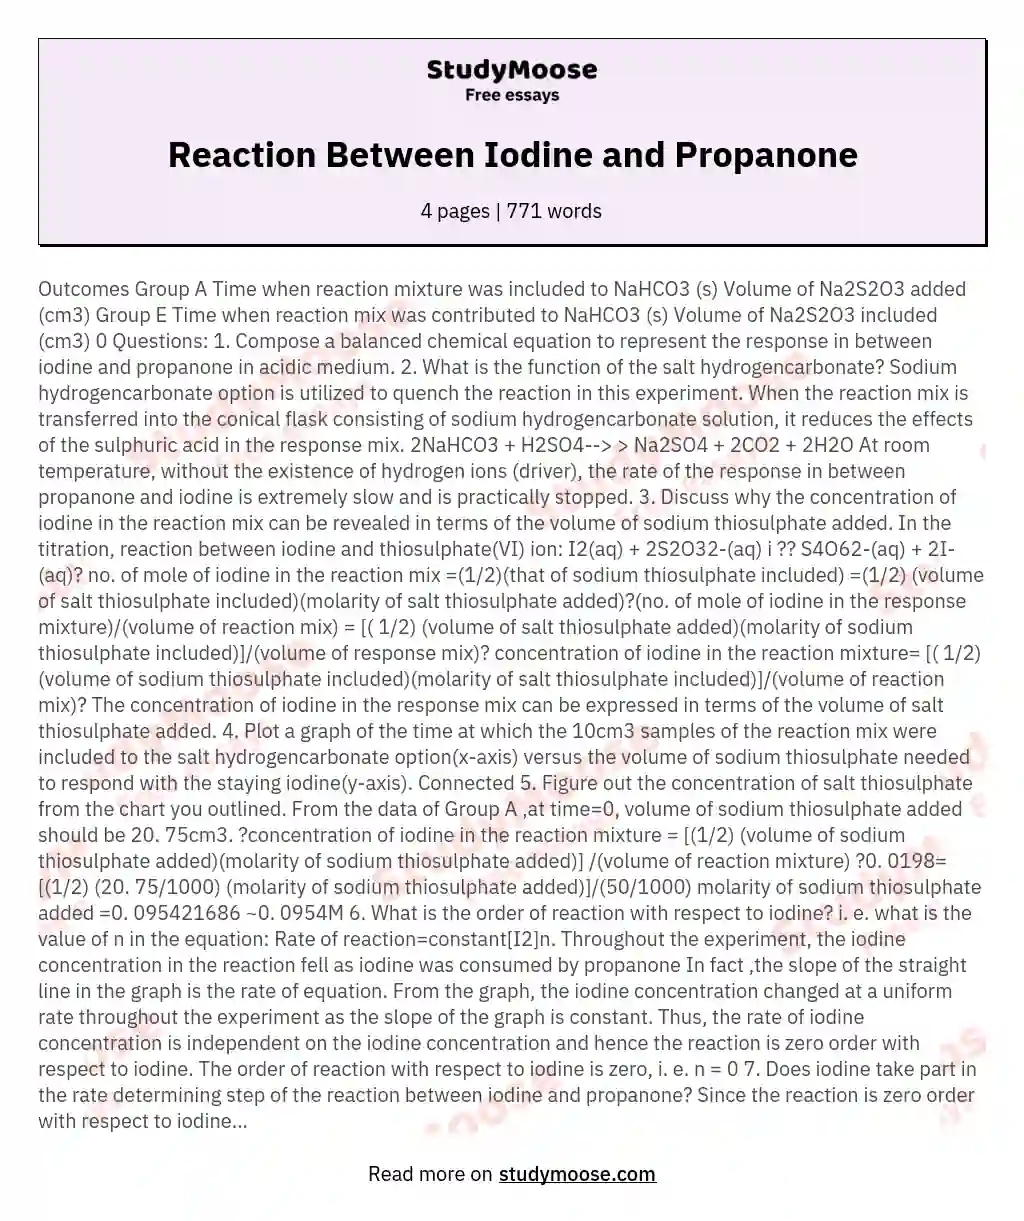 Reaction Between Iodine and Propanone essay